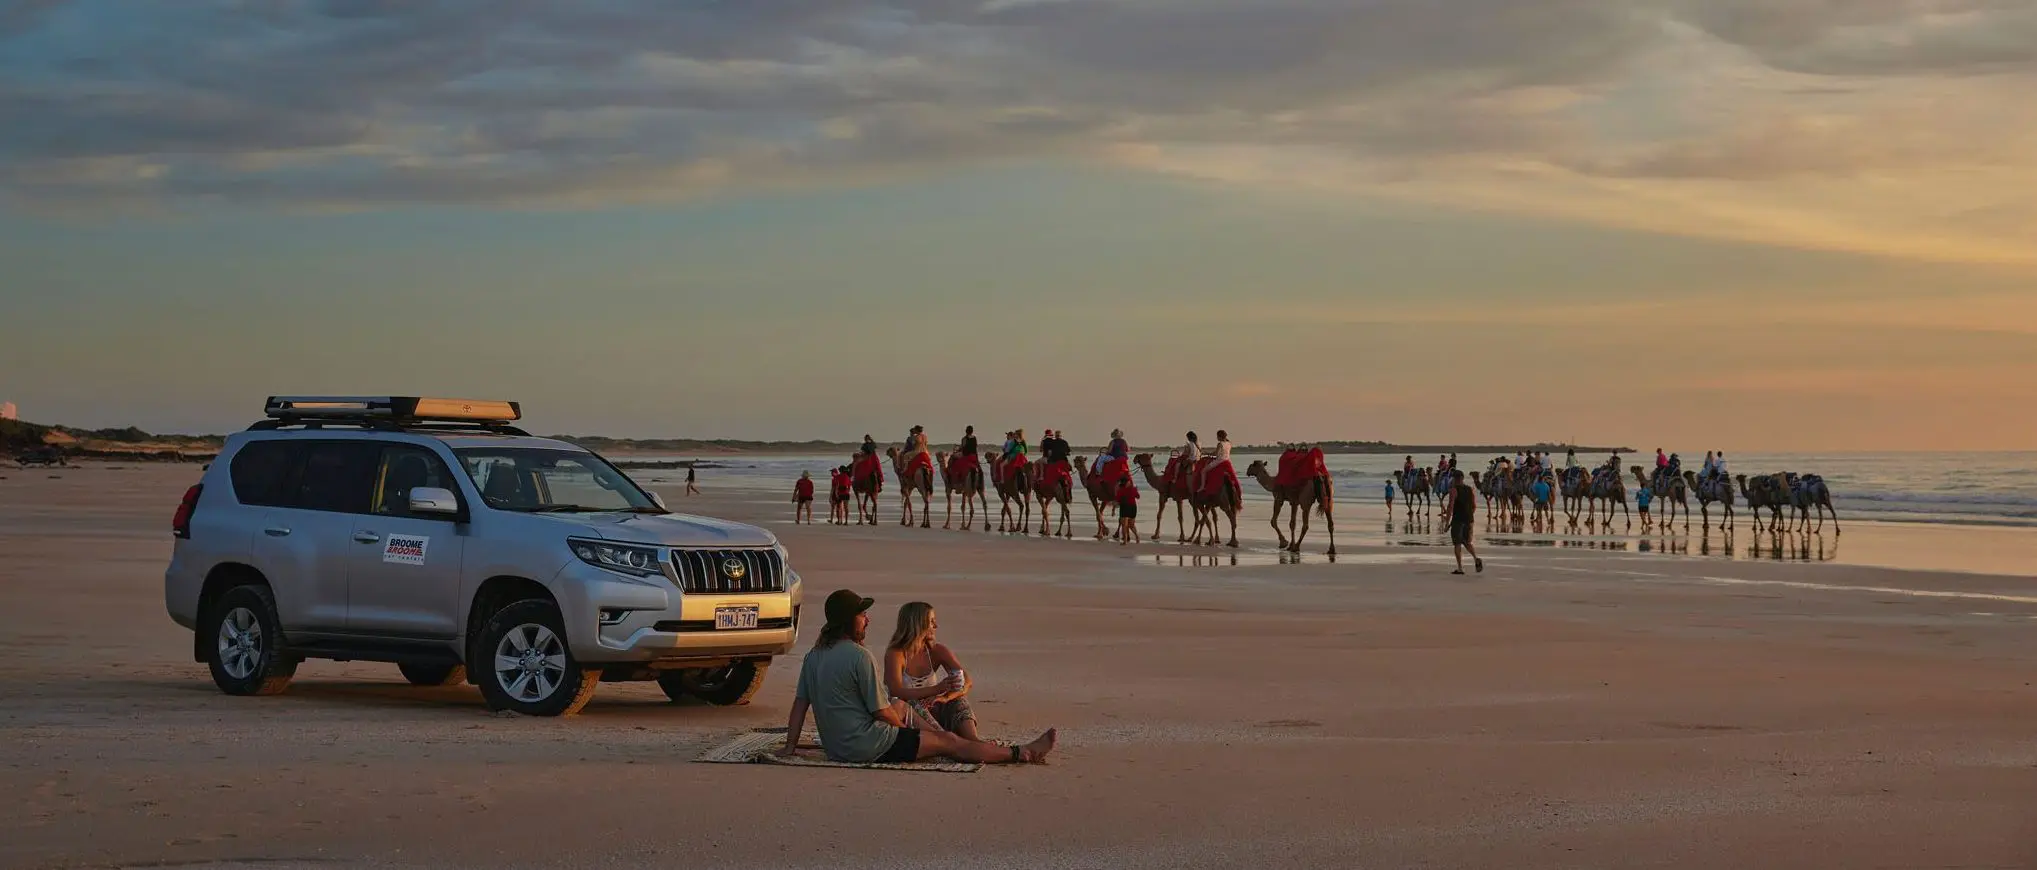 Couple watching the sunset on a beach with people riding camels in the background